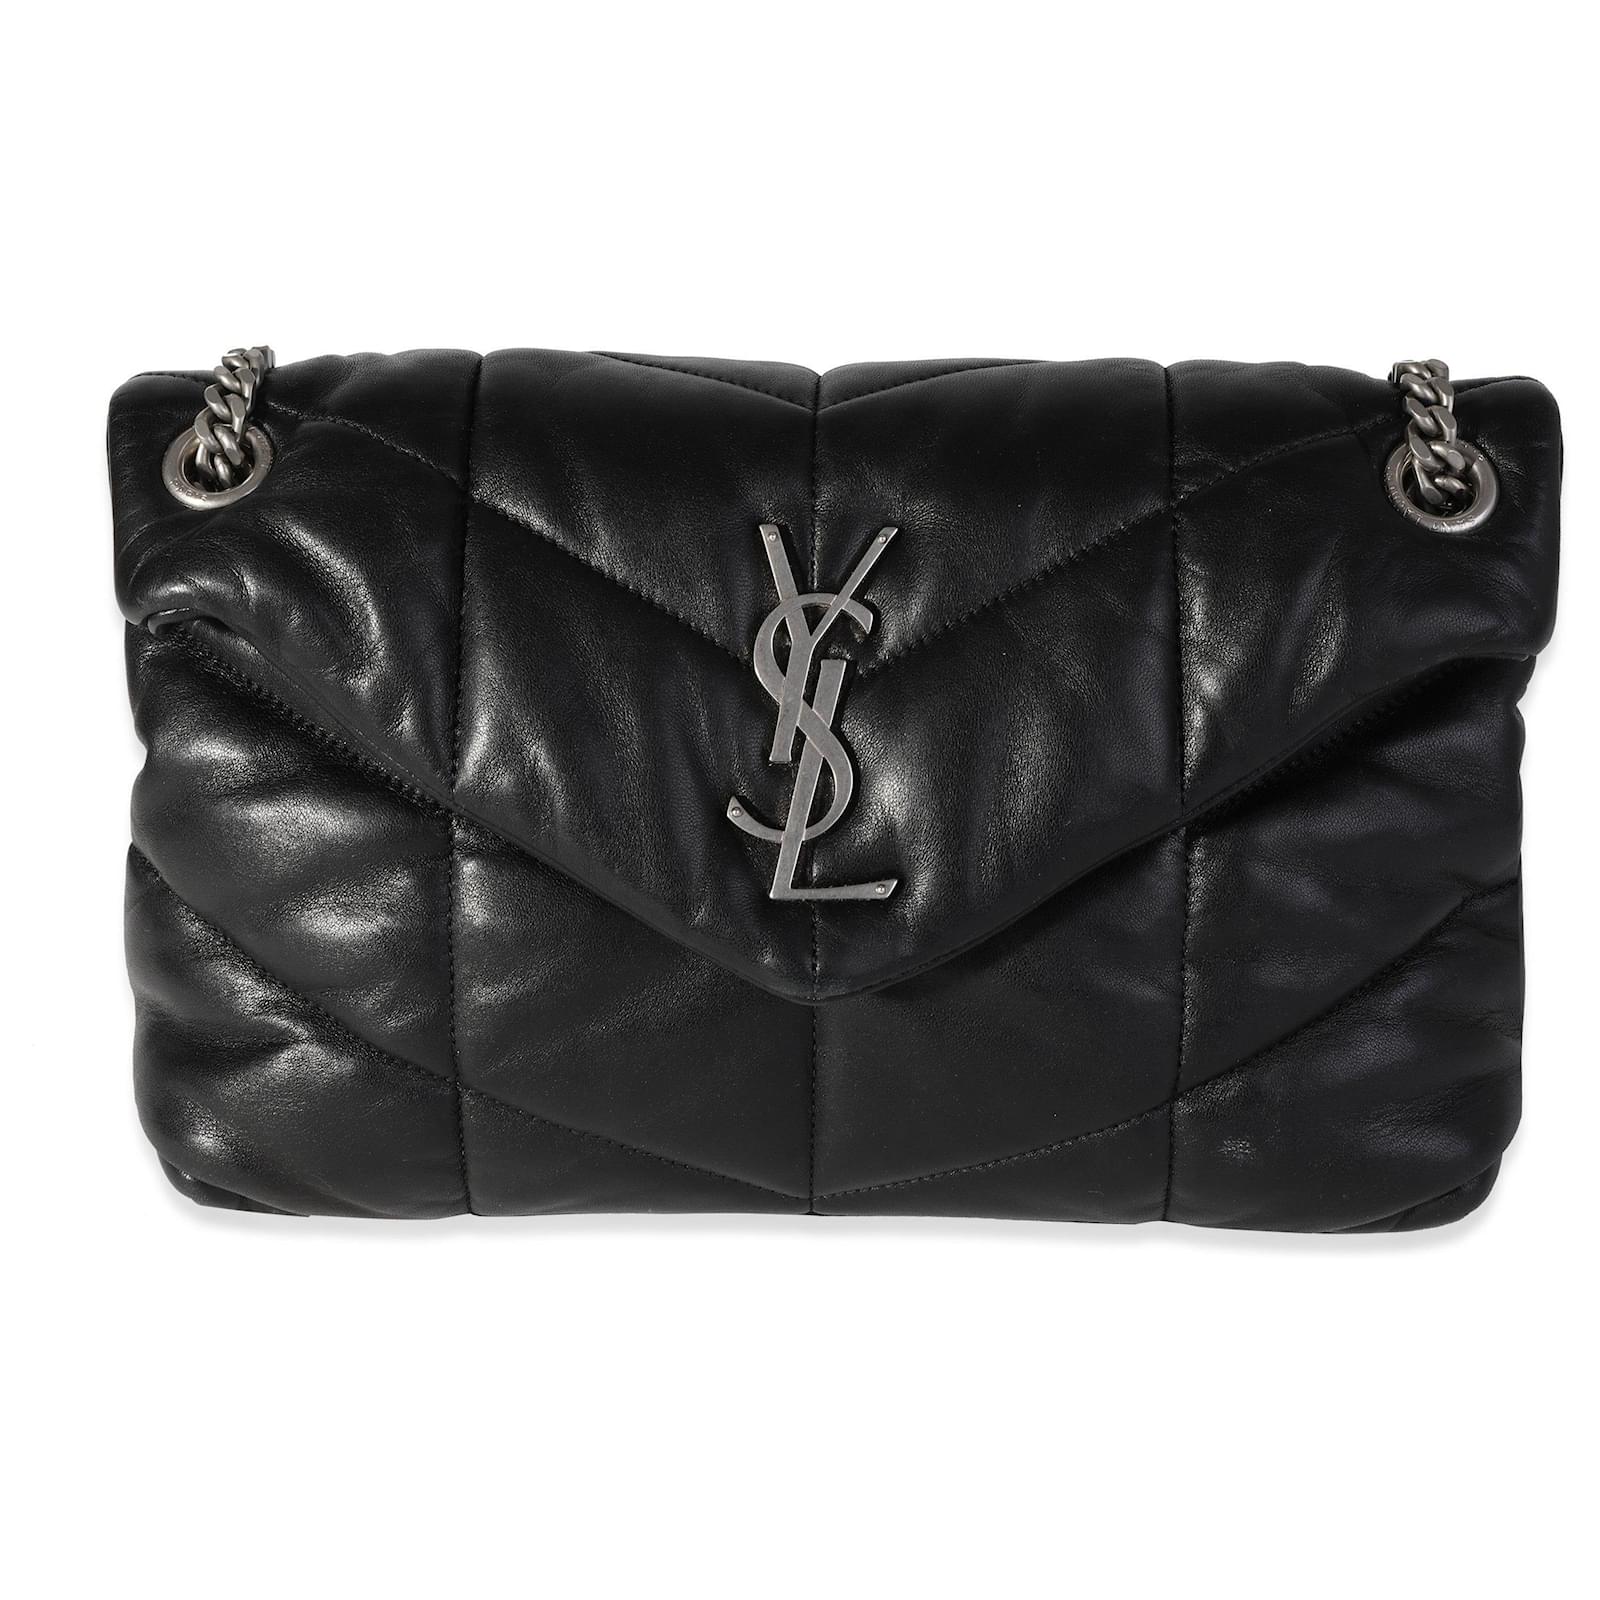 Saint Laurent Small Loulou Leather Puffer Bag